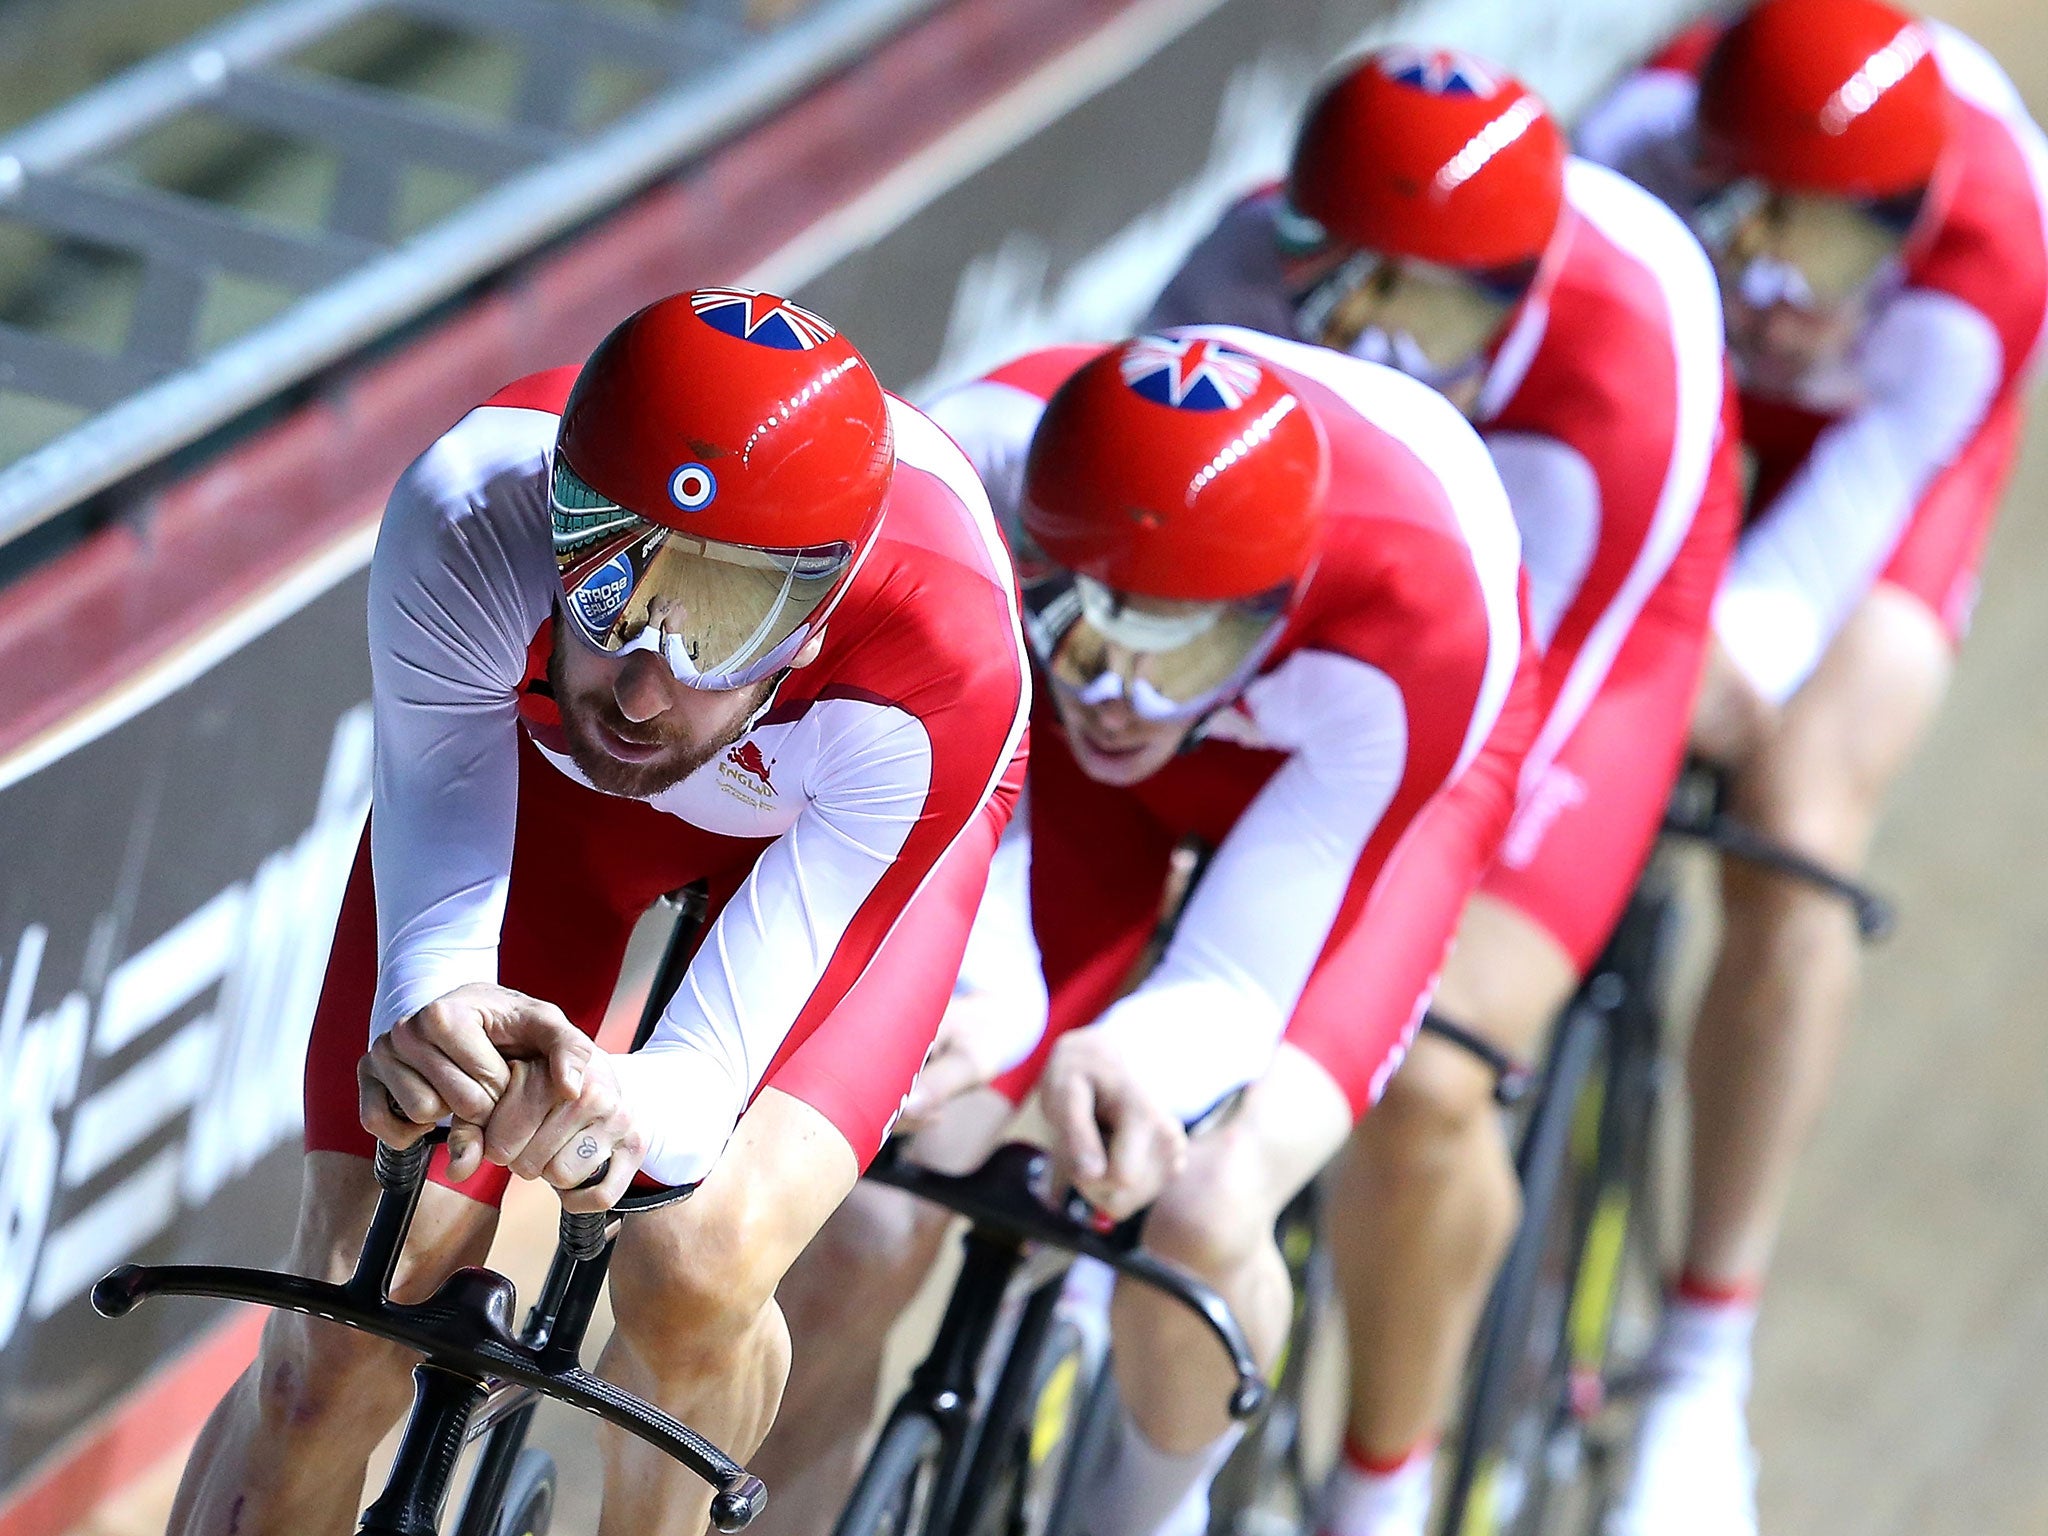 Sir Bradley Wiggins will return to track racing at the Commonwealth Games